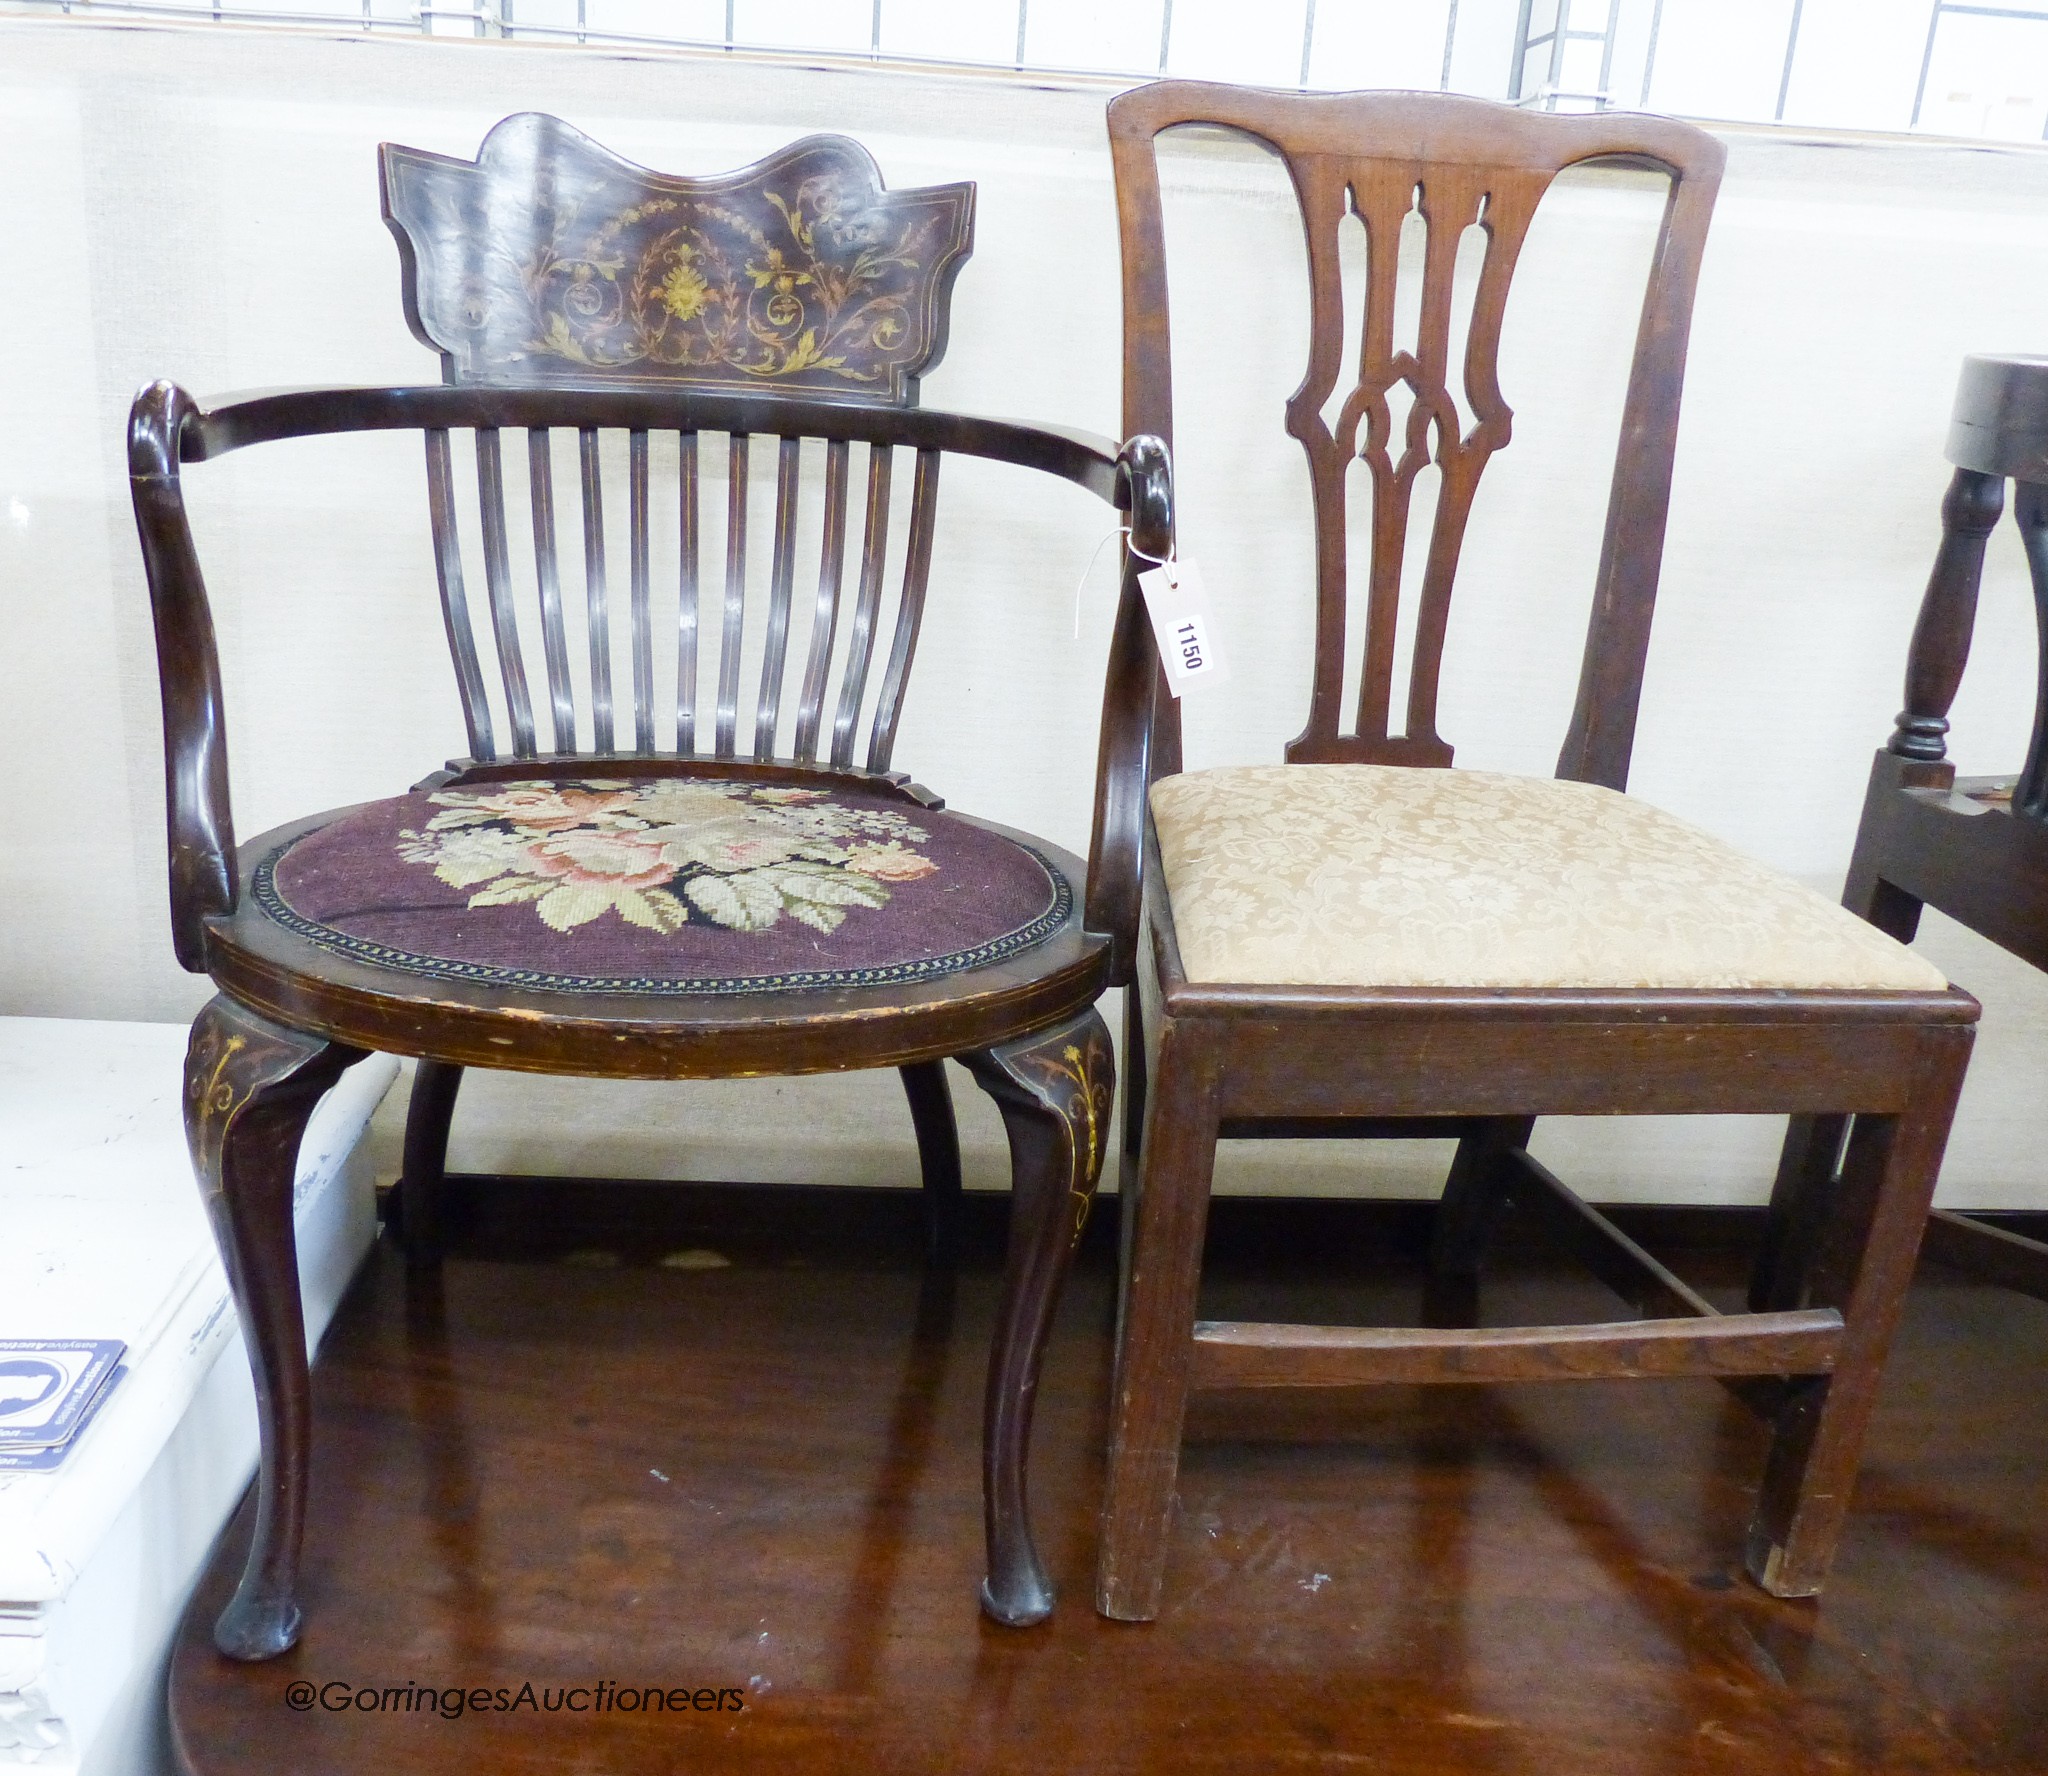 An Edwardian marquetry inlaid mahogany elbow chair and a George III provincial oak dining chair